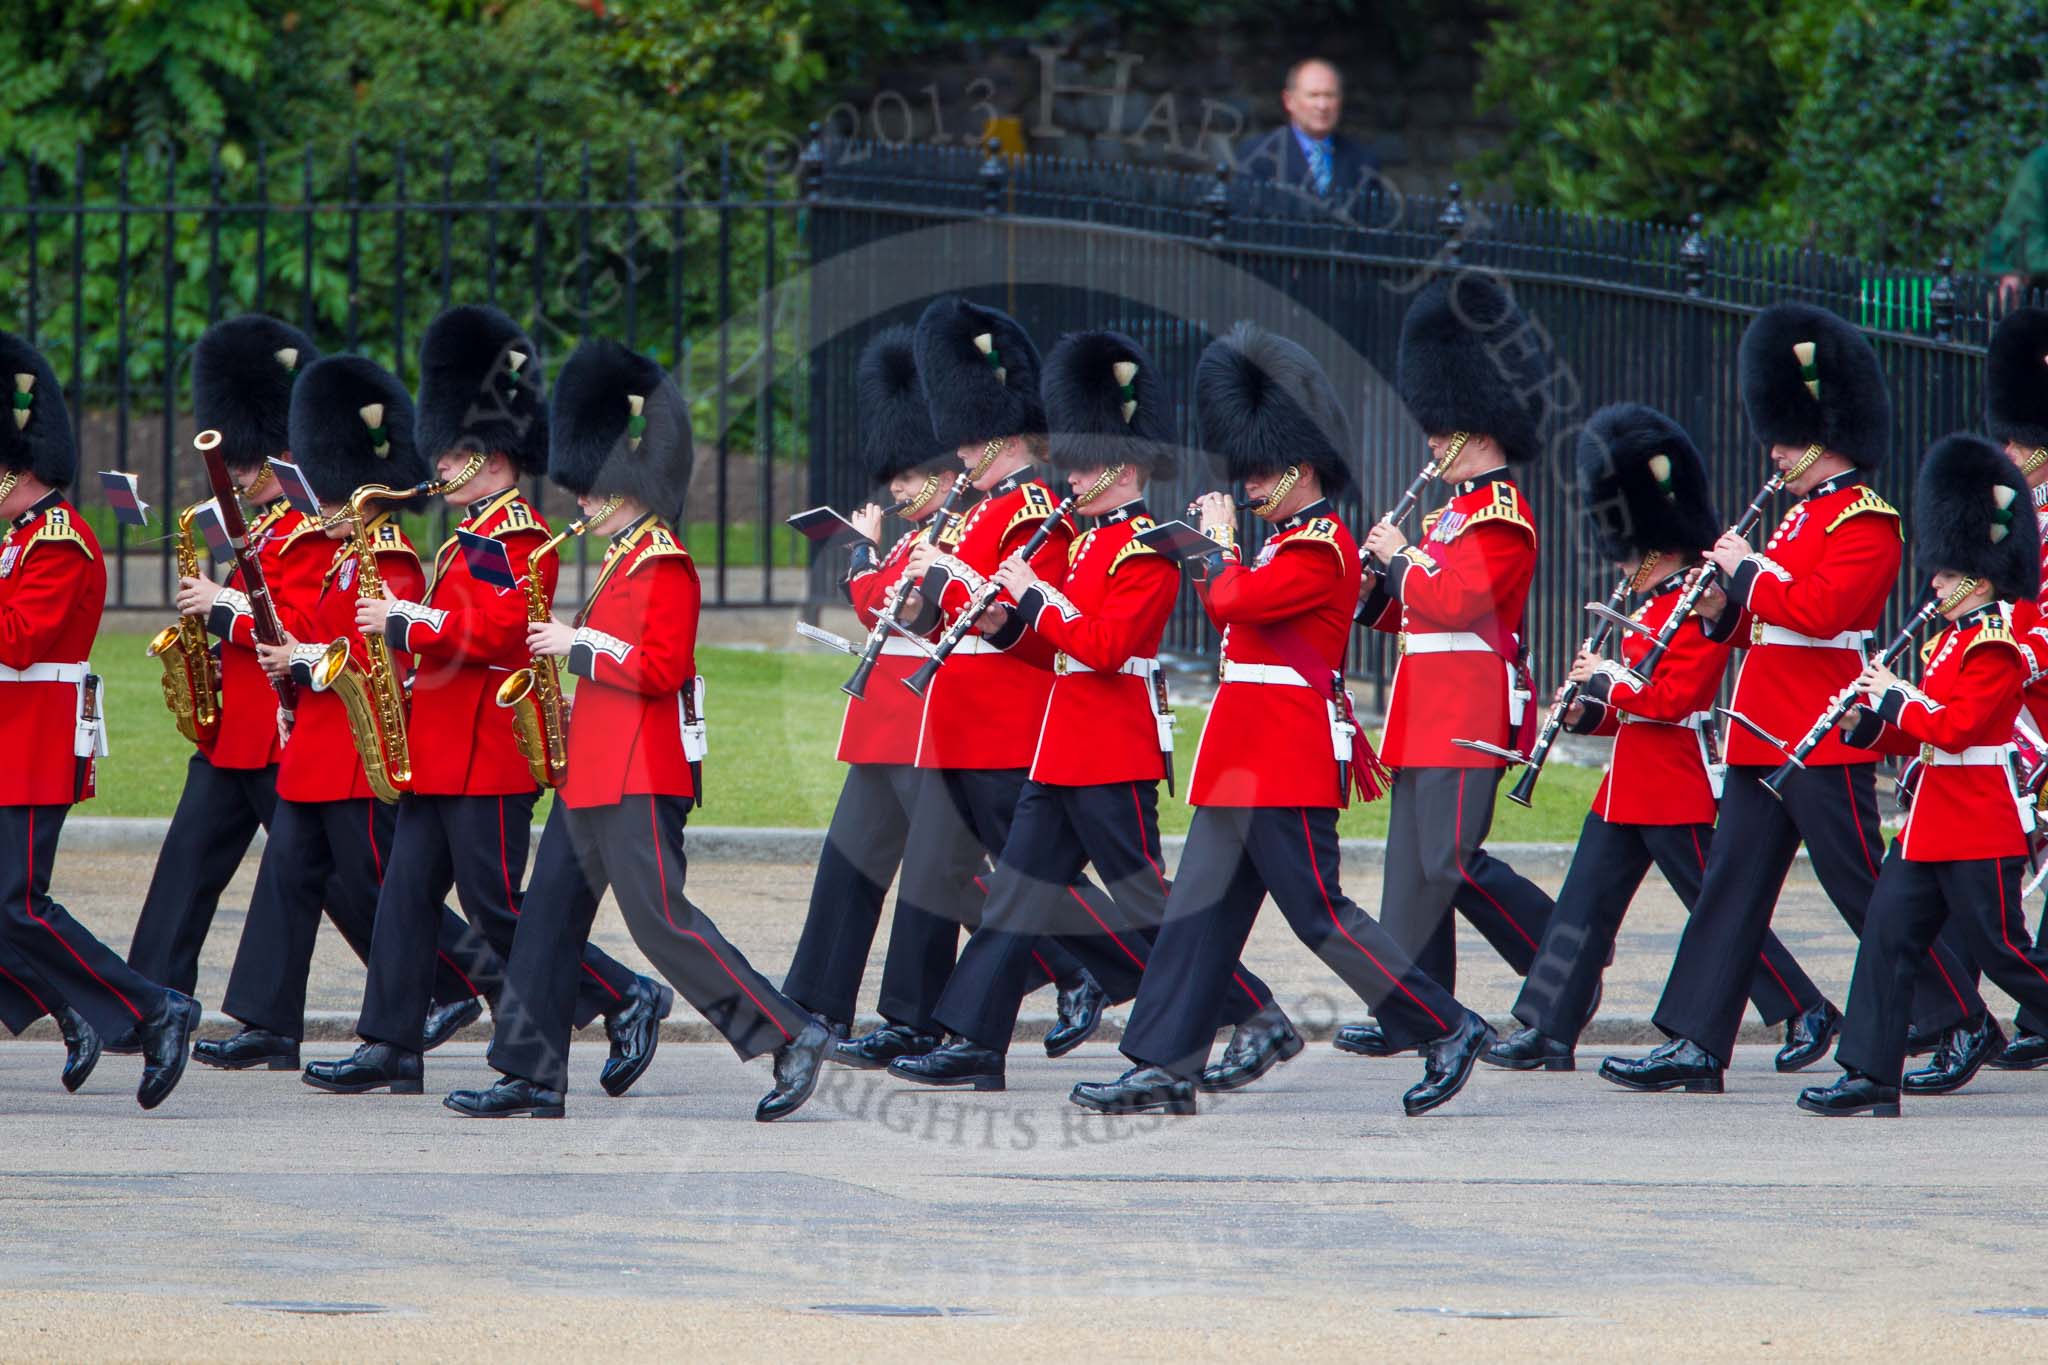 The Colonel's Review 2013: Musicians of the Band of the Welsh Guards..
Horse Guards Parade, Westminster,
London SW1,

United Kingdom,
on 08 June 2013 at 10:31, image #125